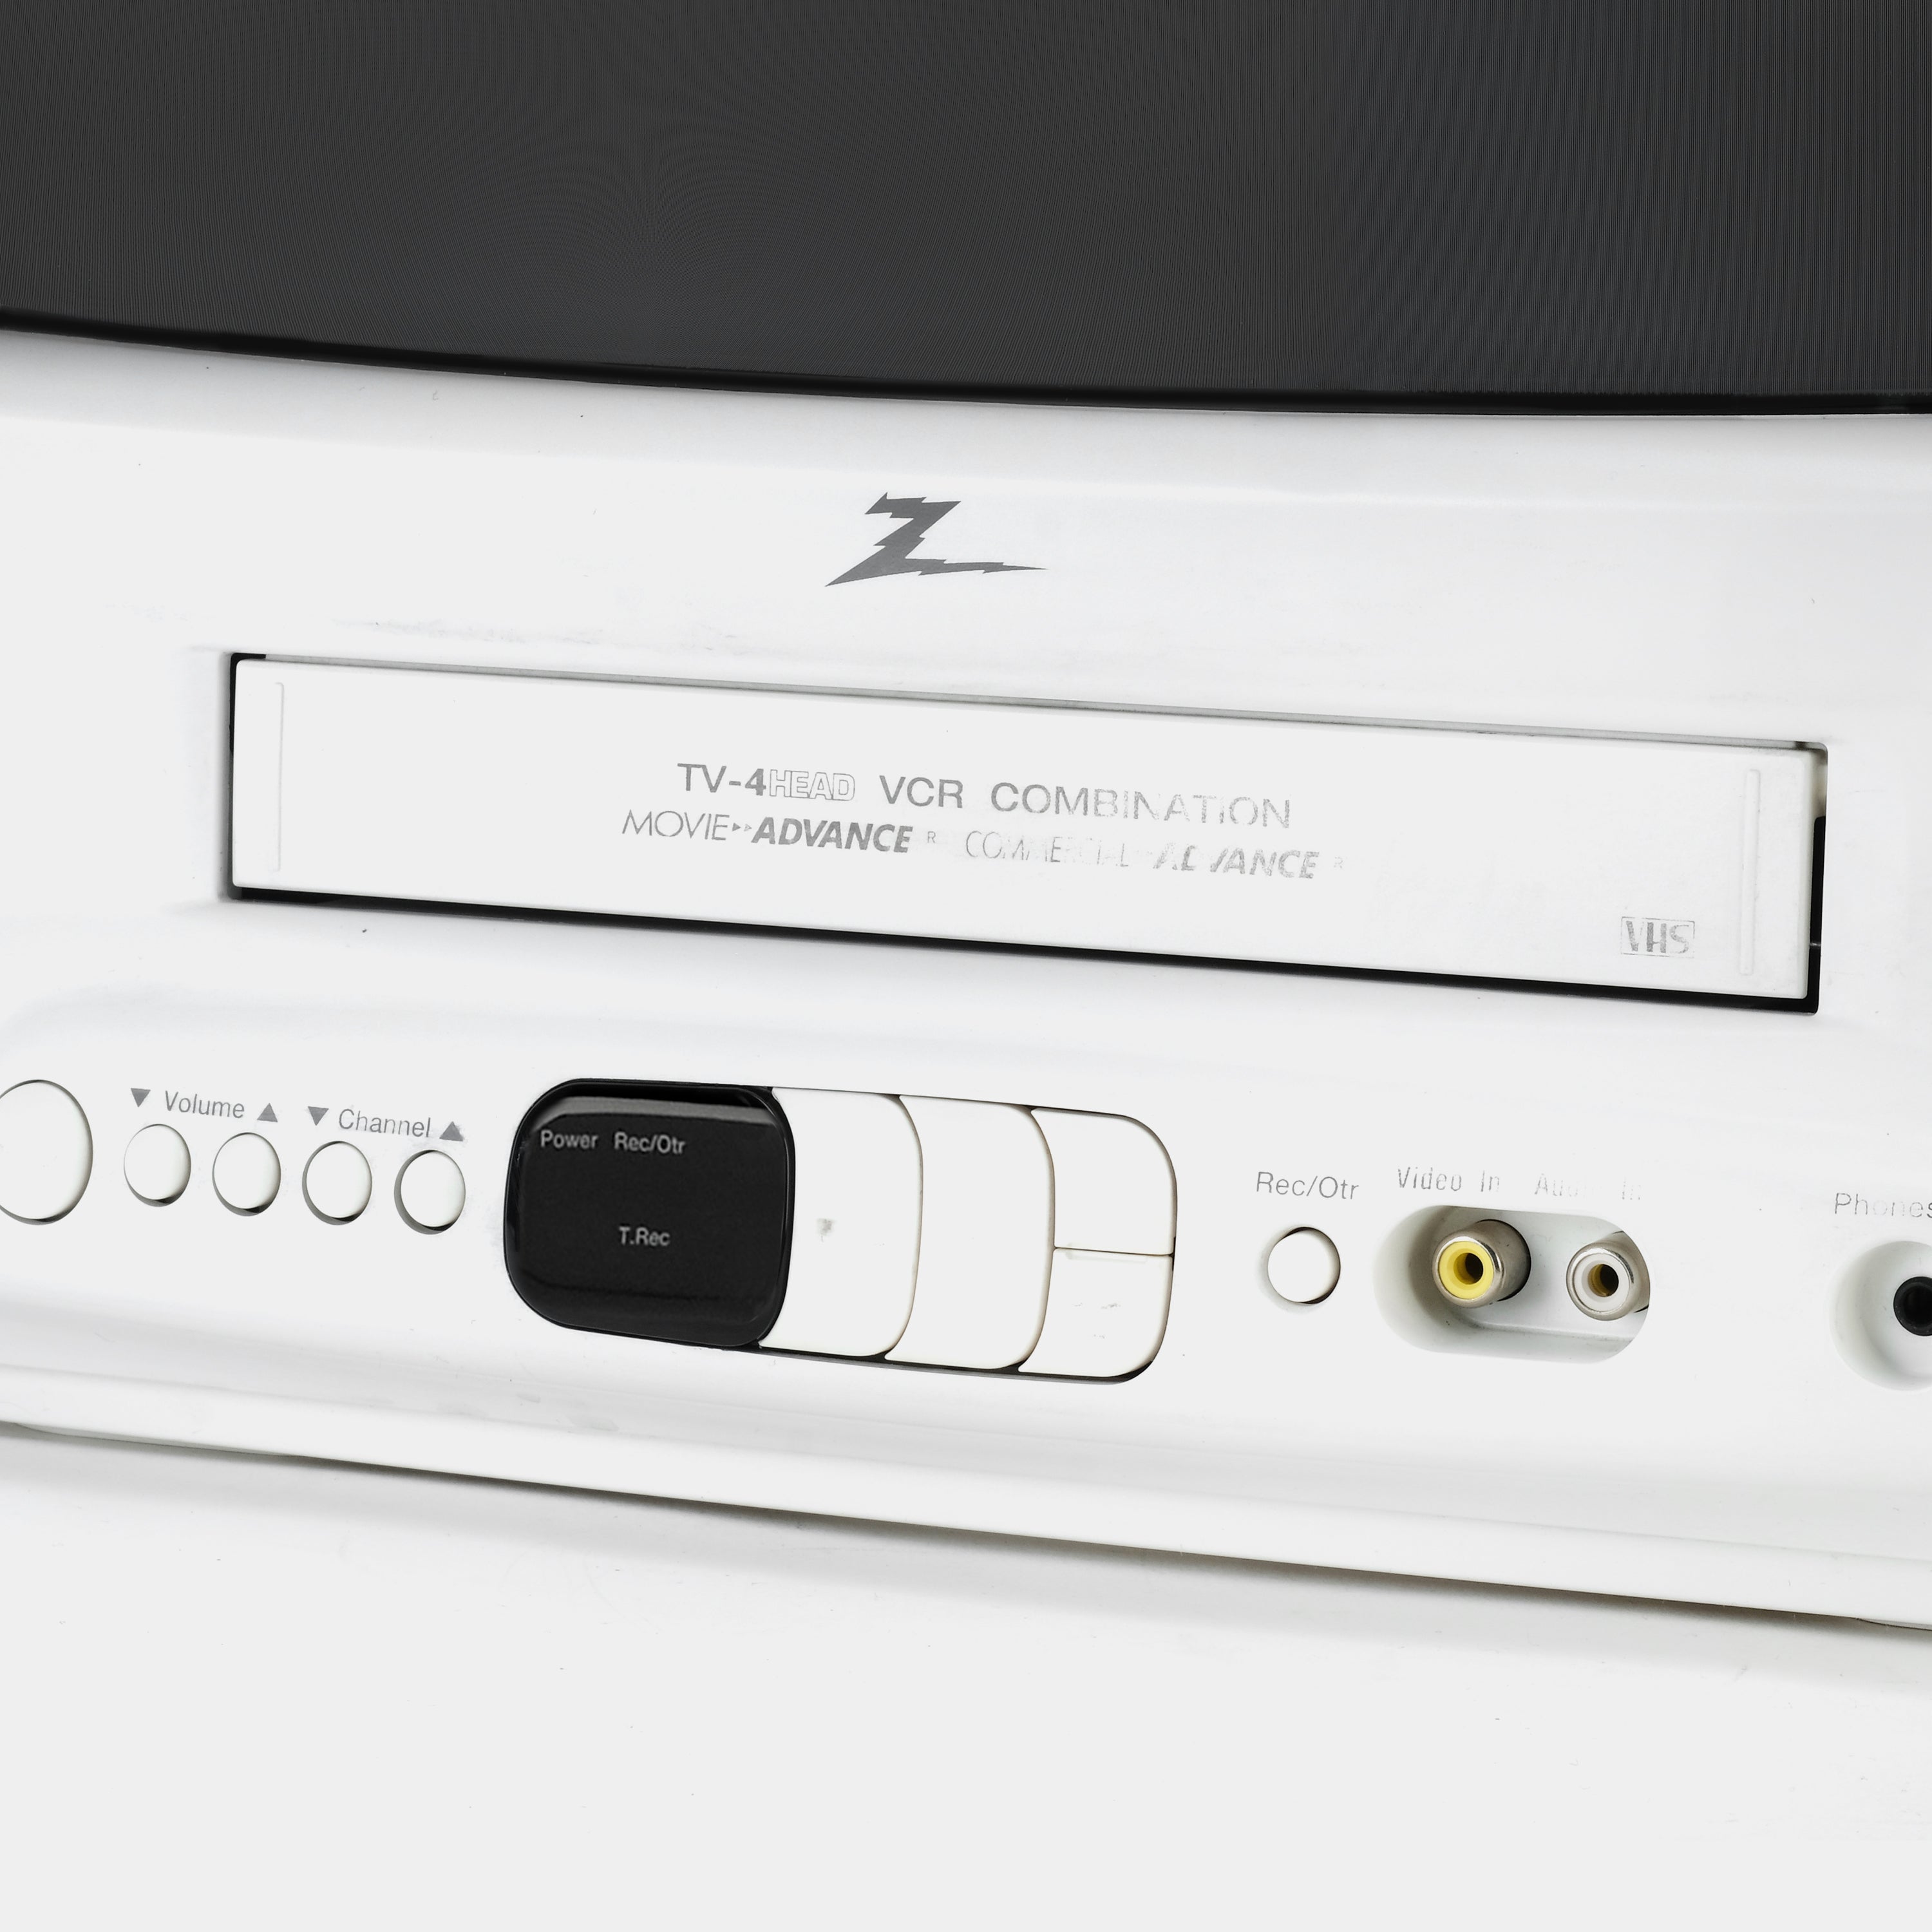 Zenith White CRT TV and VCR Television (Refurbished B-Grade)